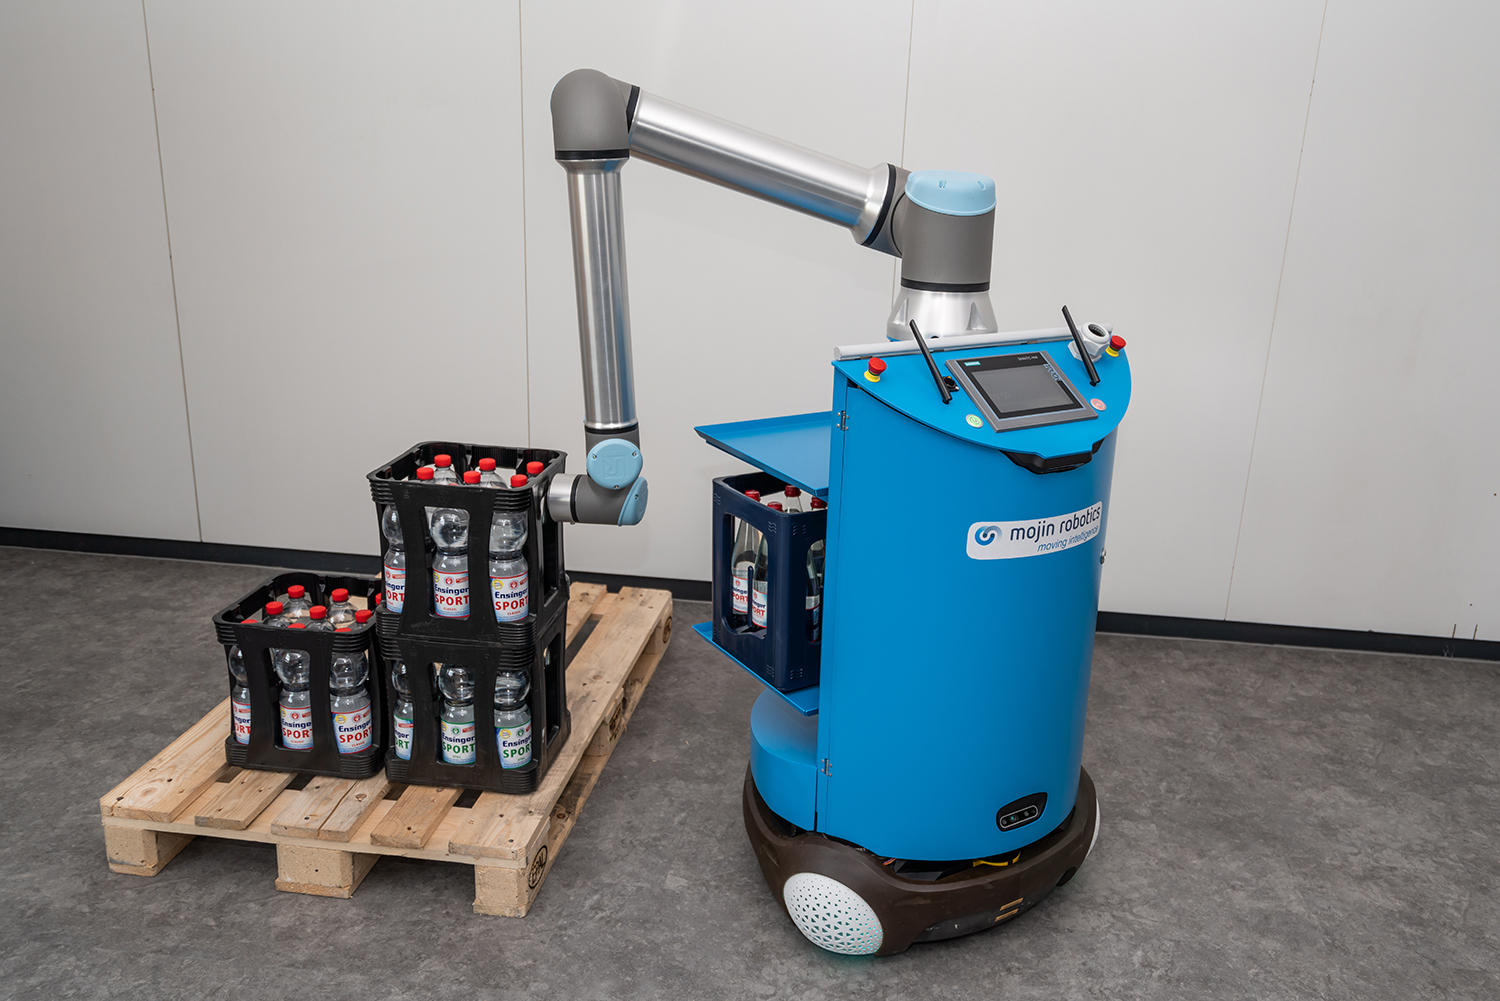 Roboter lifts drinks crate up